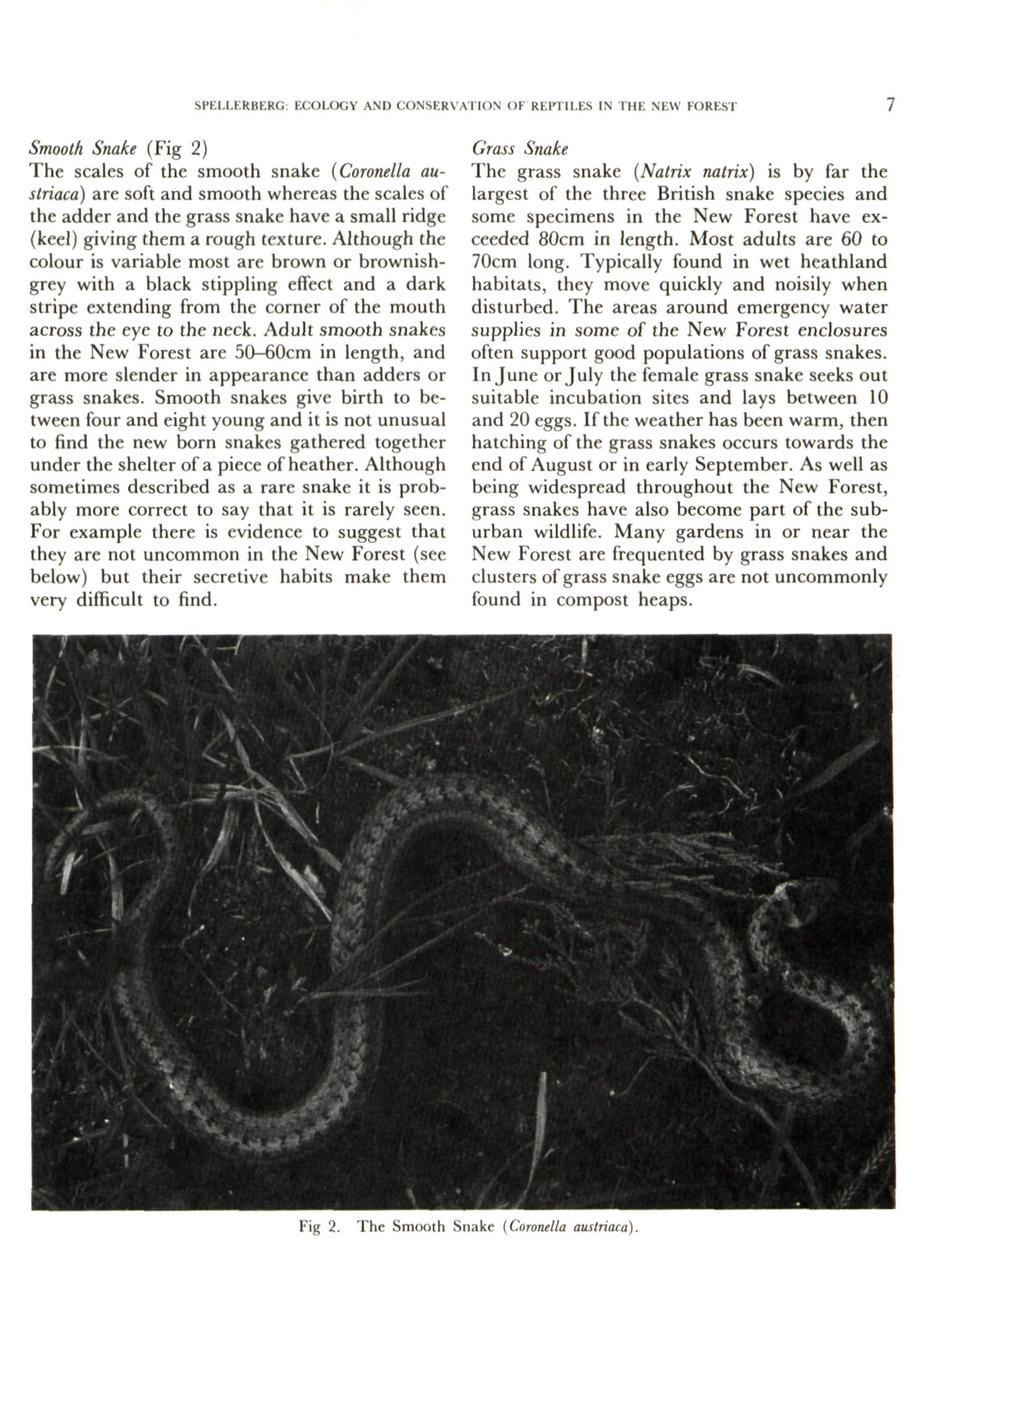 SPELLERBERG: ECOLOGY AND CONSERVATION OF REPTILES IN THE NEW FOREST 7 Smooth Snake (Fig 2) The scales of the smooth snake (Coronella austriaca) are soft and smooth whereas the scales of the adder and